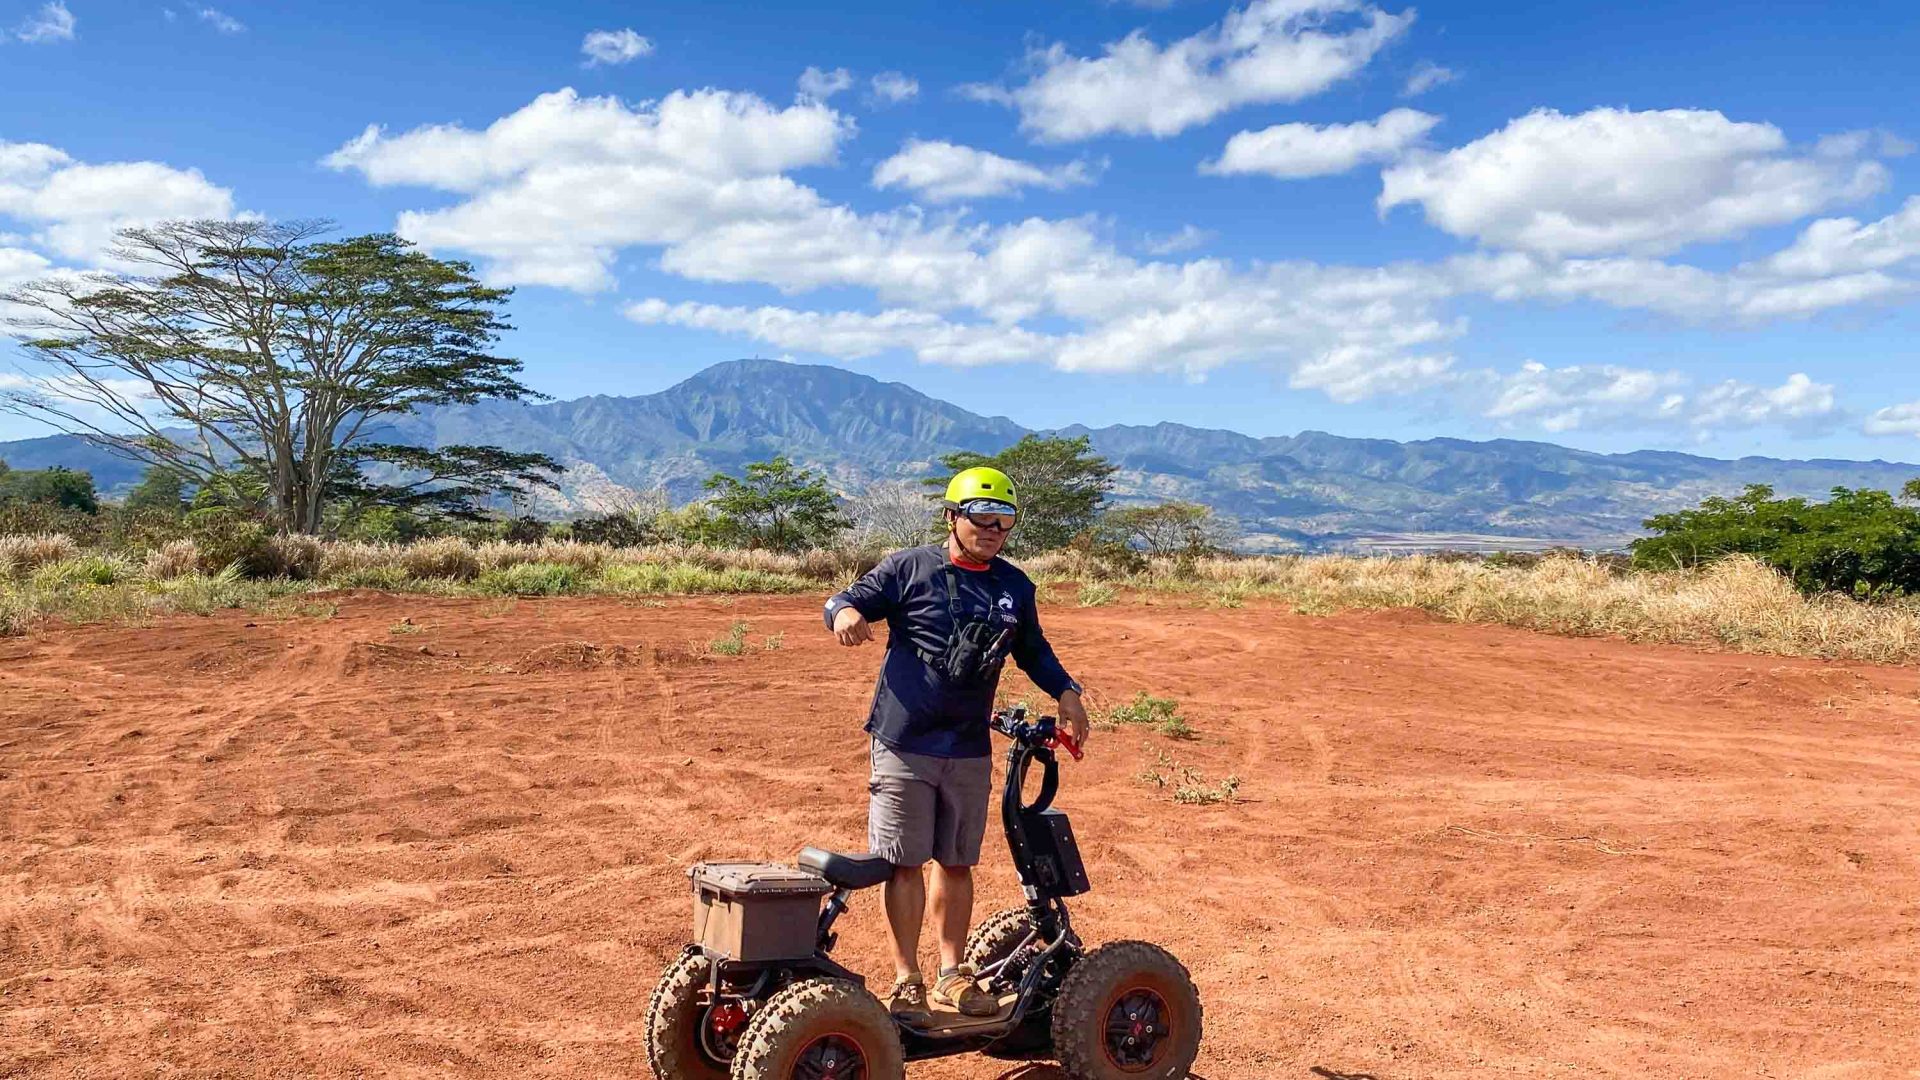 Keola stands next to his all terrain vehicle. The ground is red sand and there are mountains in the background.